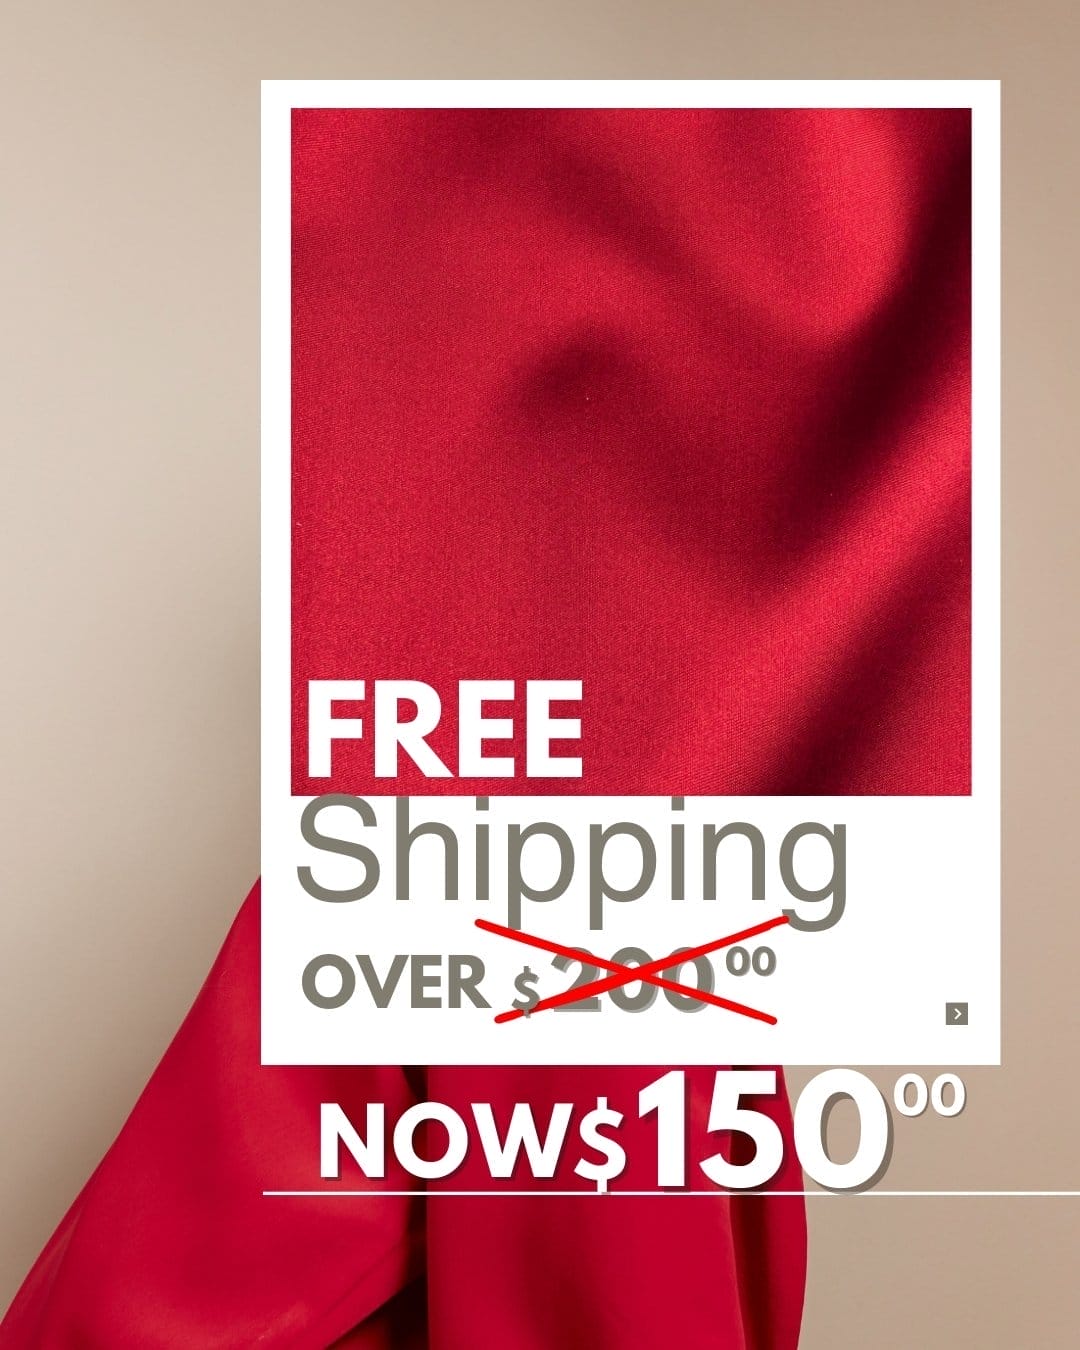 NEW! Free Shipping over \\$150.